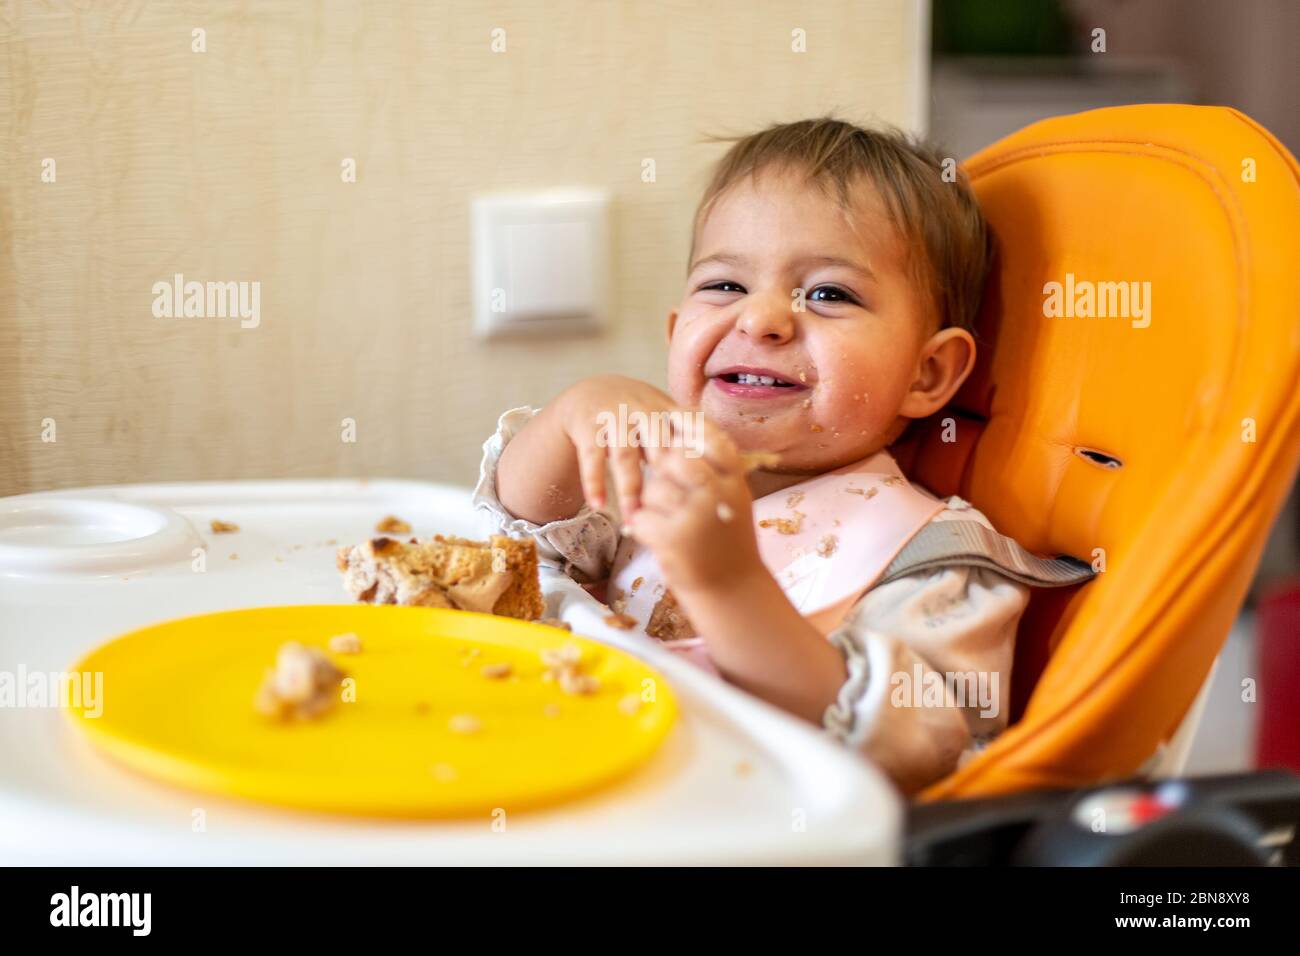 cute baby sits in an orange baby chair with a table with dirty hands and face, looks in camera and laughs. on table are crumbs and an orange plate Stock Photo